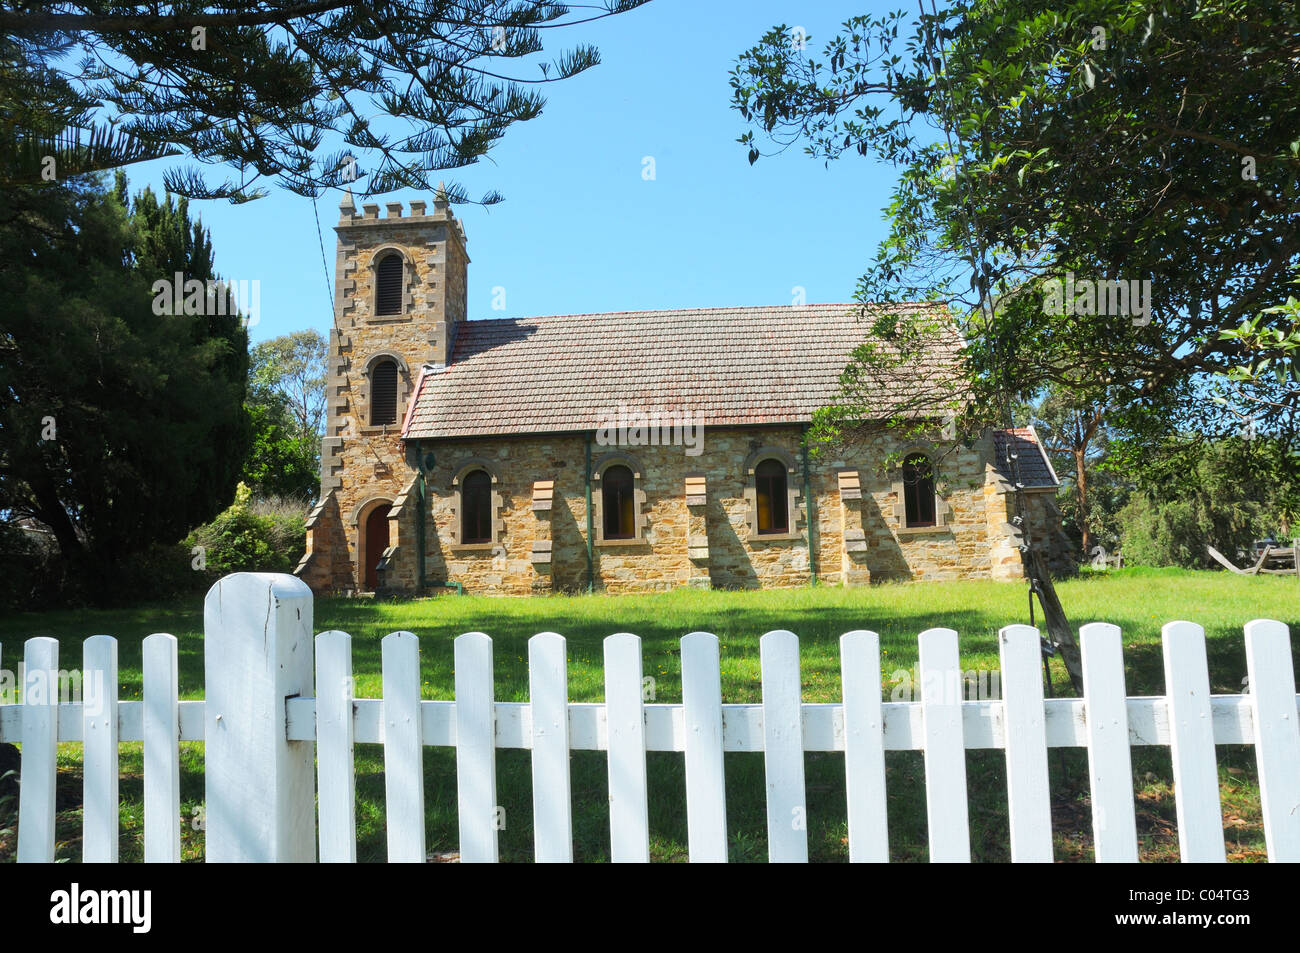 The church at Jamberoo village in New South Wales, Australia Stock Photo